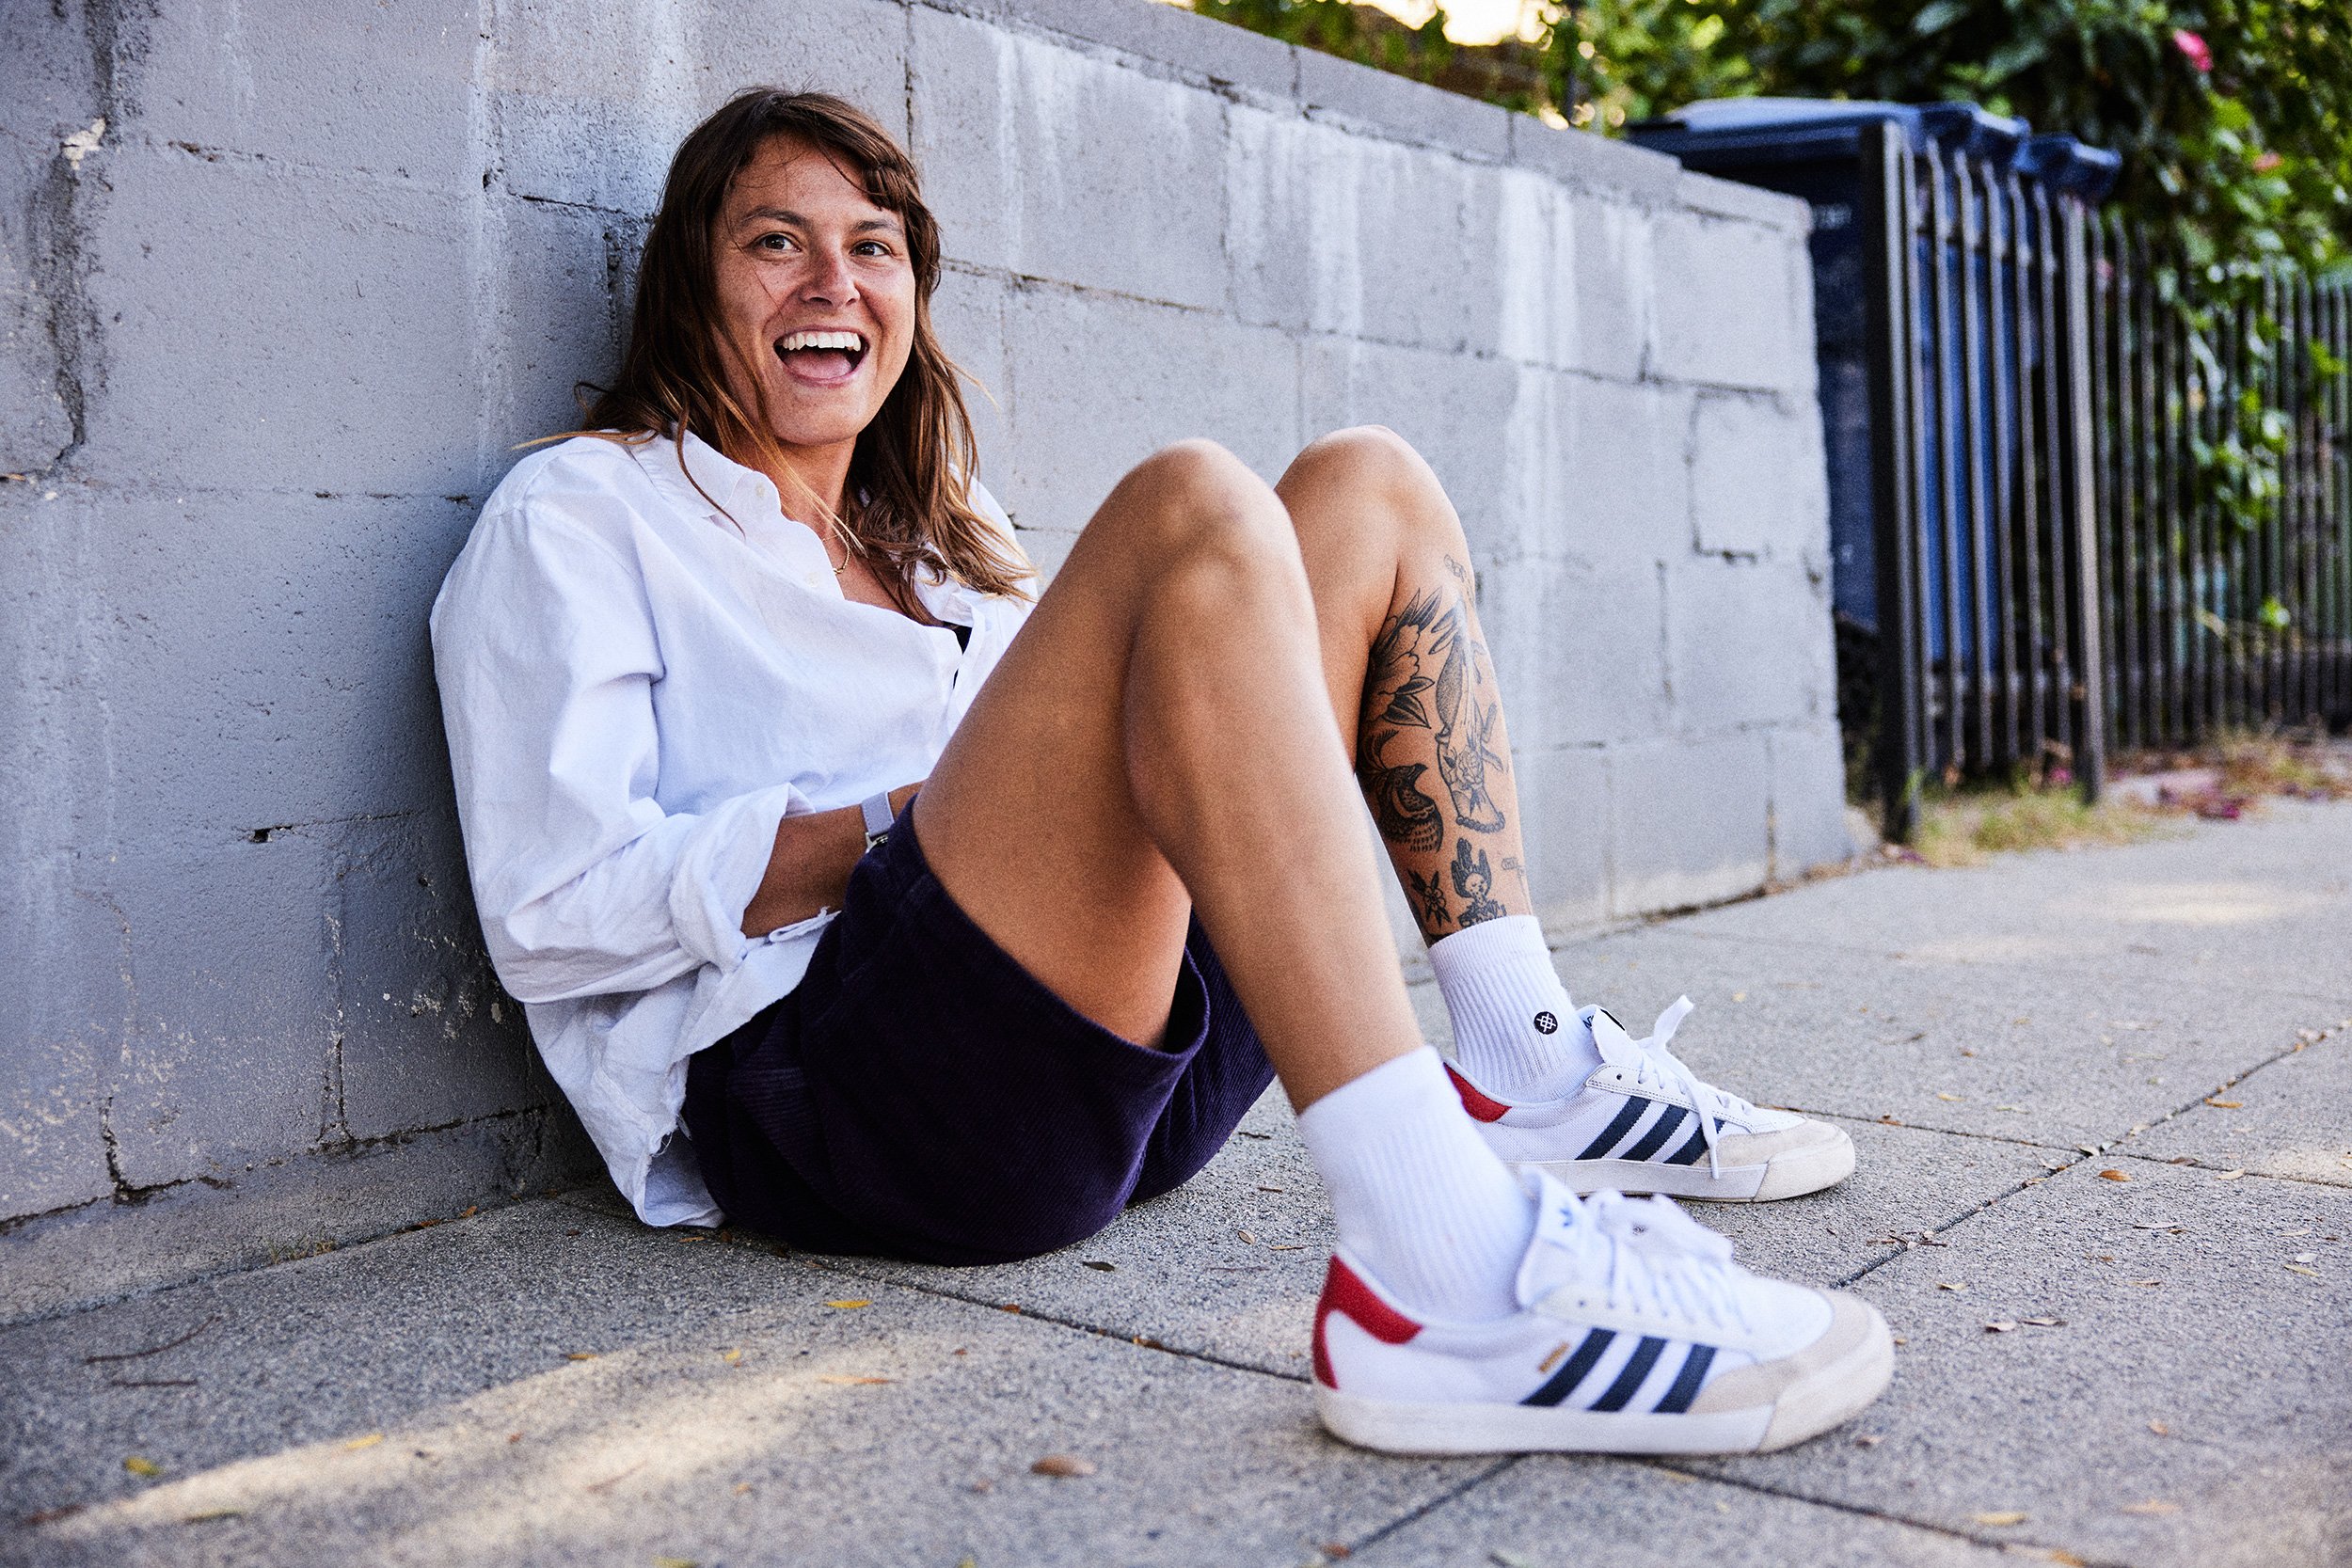 Nora Vasconcello's New Adidas Pro Model Shoe Drops Today - Get Em' Fast! — Girl Is NOT 4 Letter Word